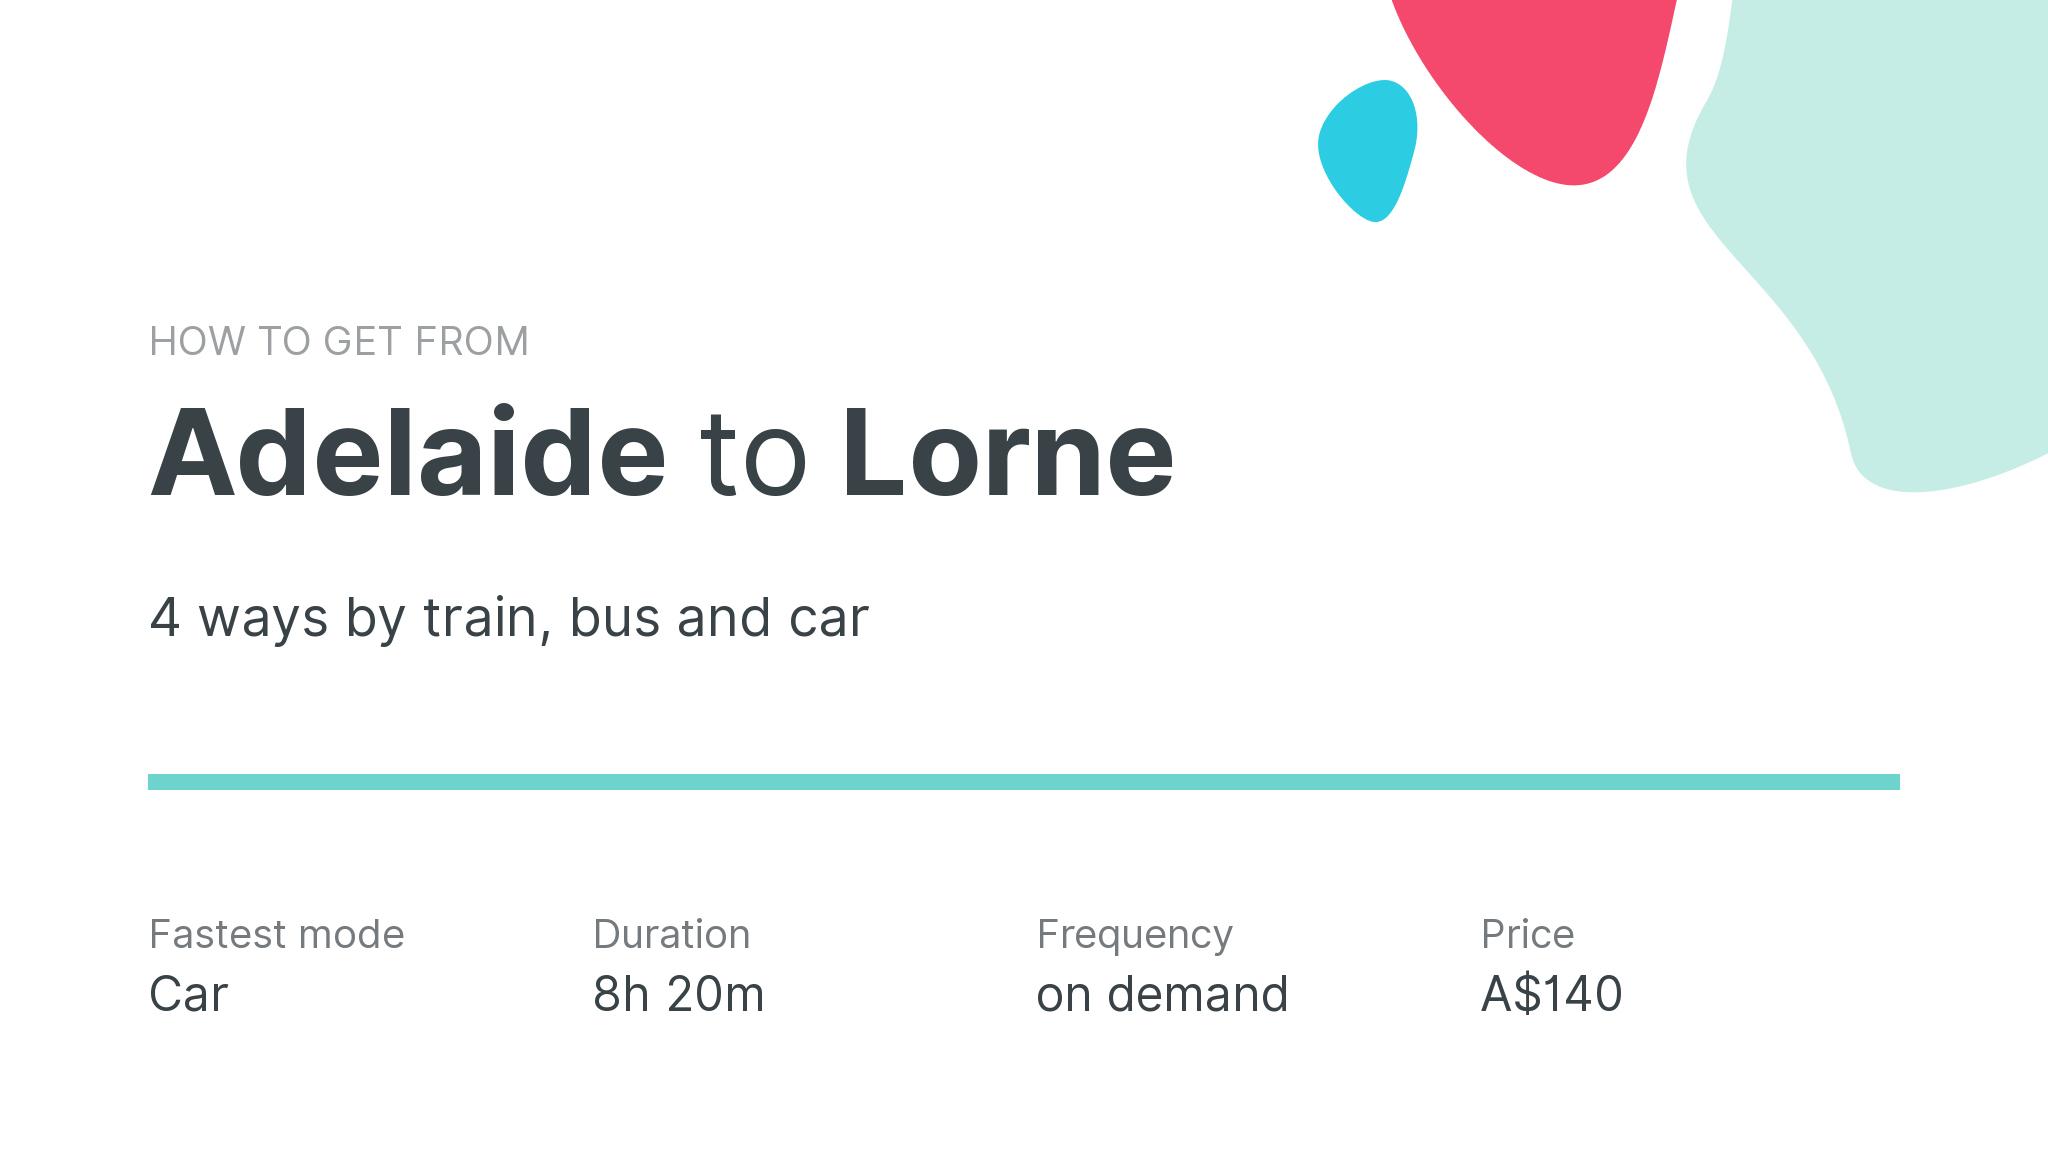 How do I get from Adelaide to Lorne